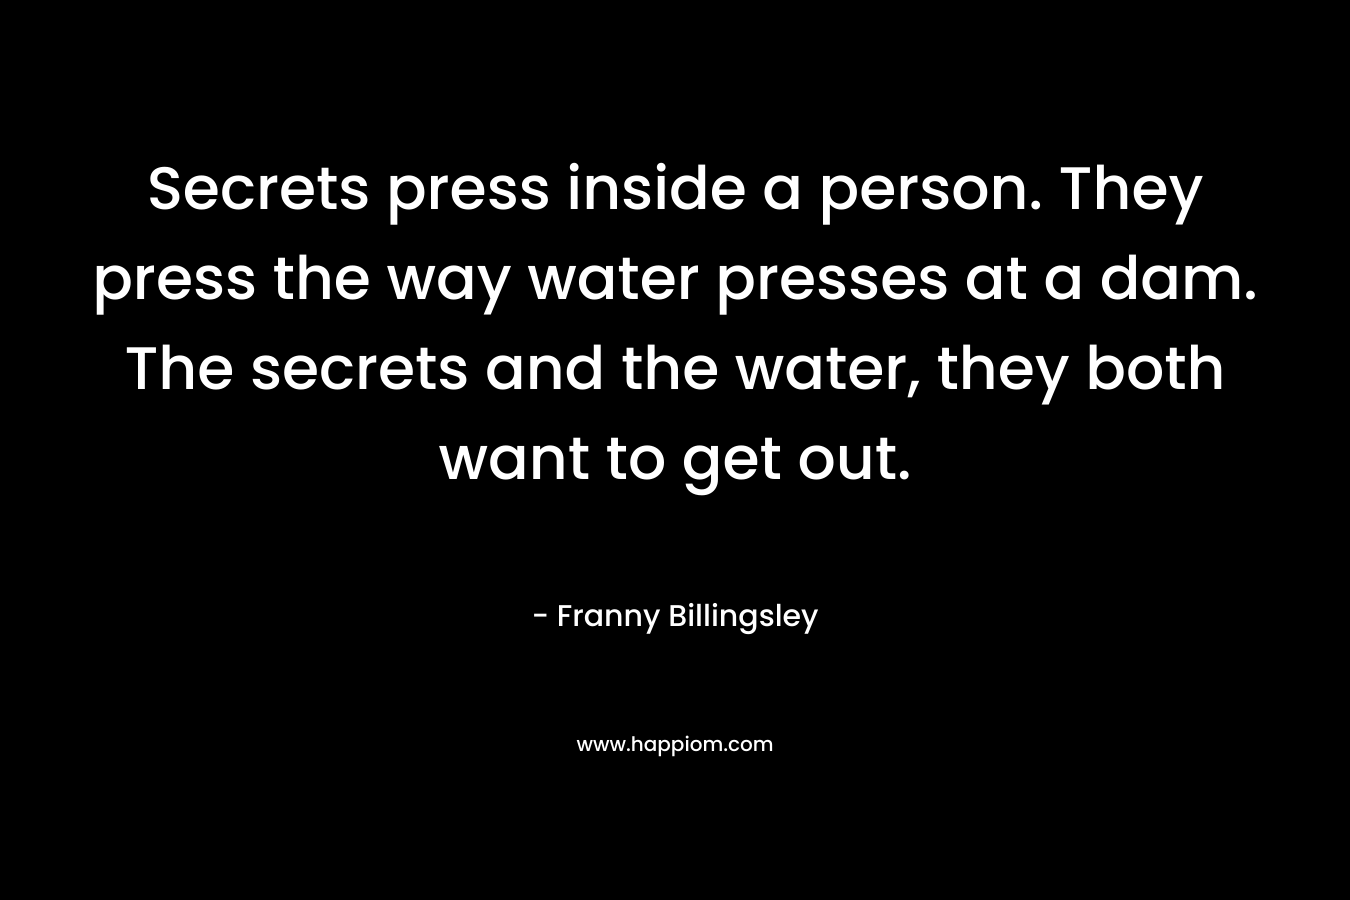 Secrets press inside a person. They press the way water presses at a dam. The secrets and the water, they both want to get out.